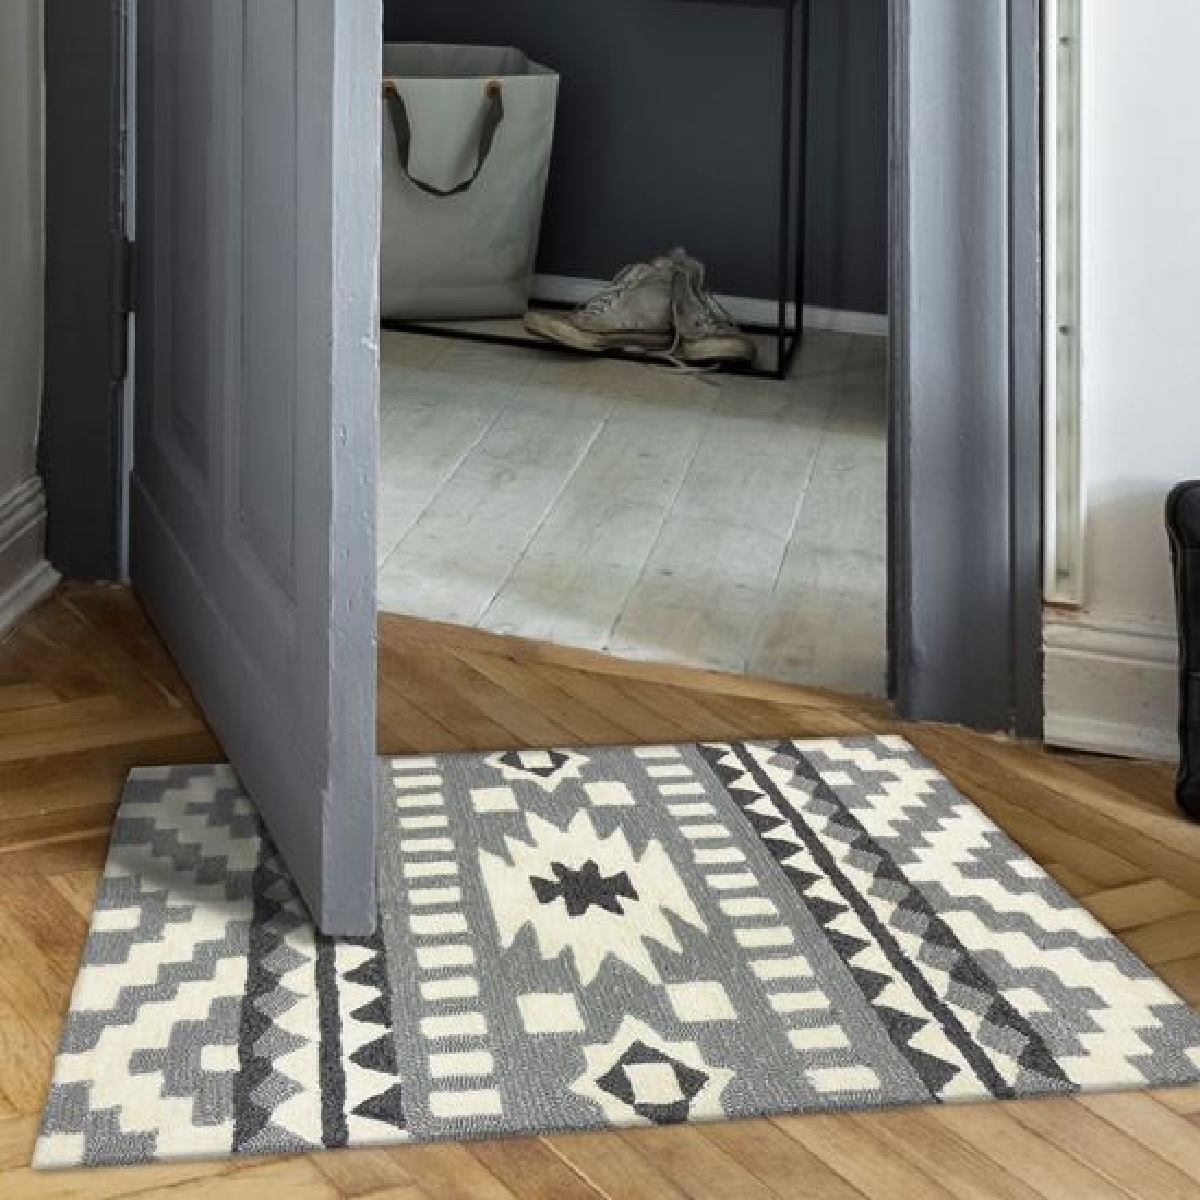 Diva At Home 22” x 34” Gray and White Southwestern Inspired Indoor/Outdoor Accent Rug - image 2 of 2